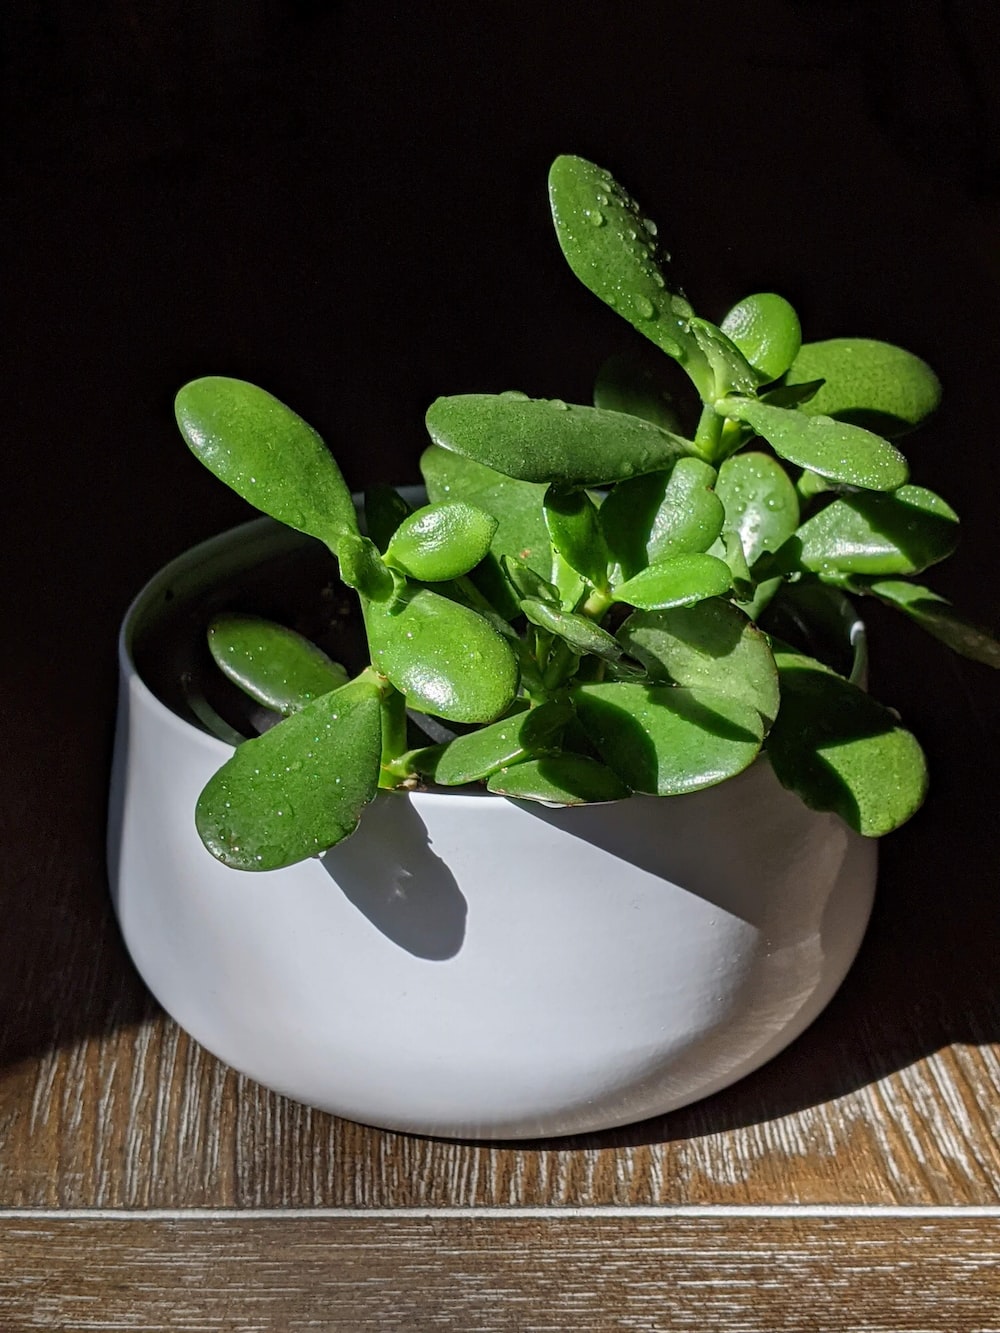 Where should a jade plant be placed in an office desk?